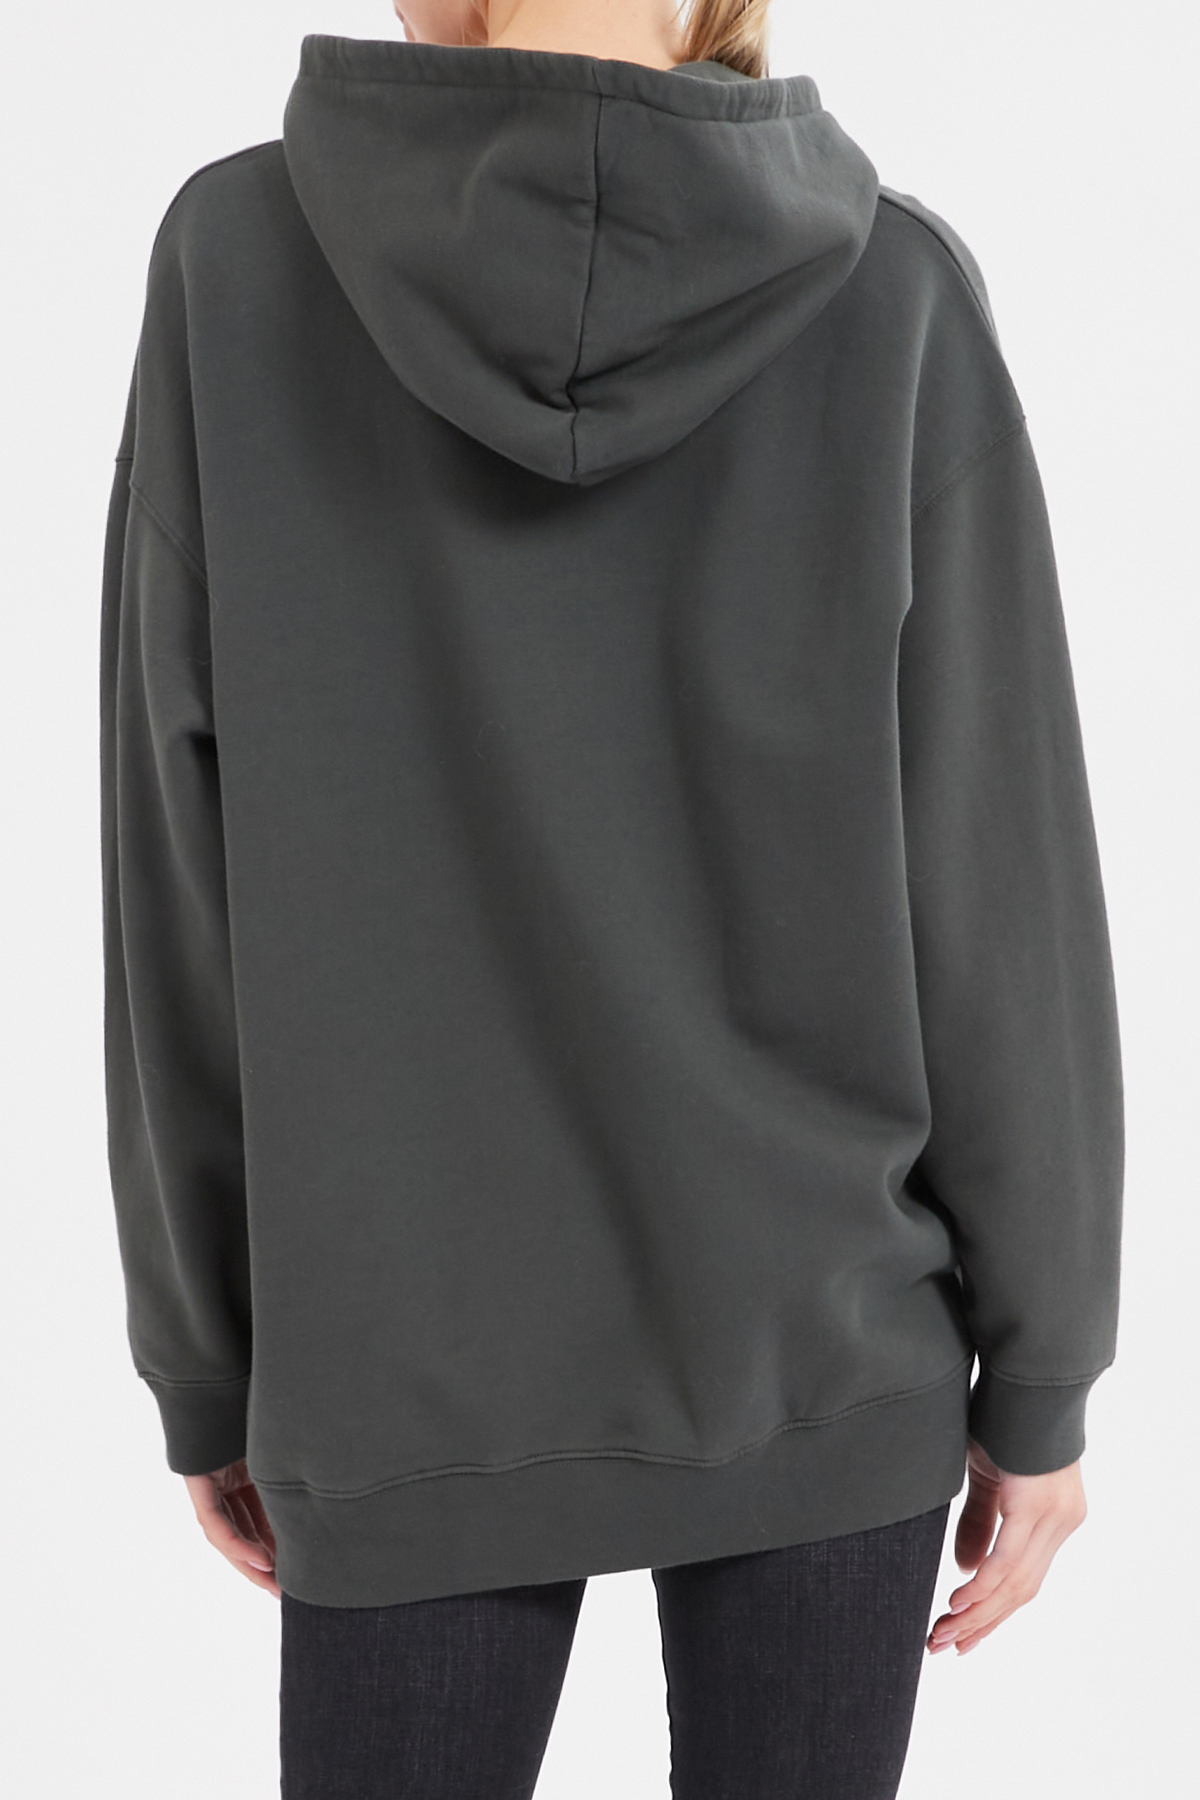 Cotton Hoodie Vincent NYC